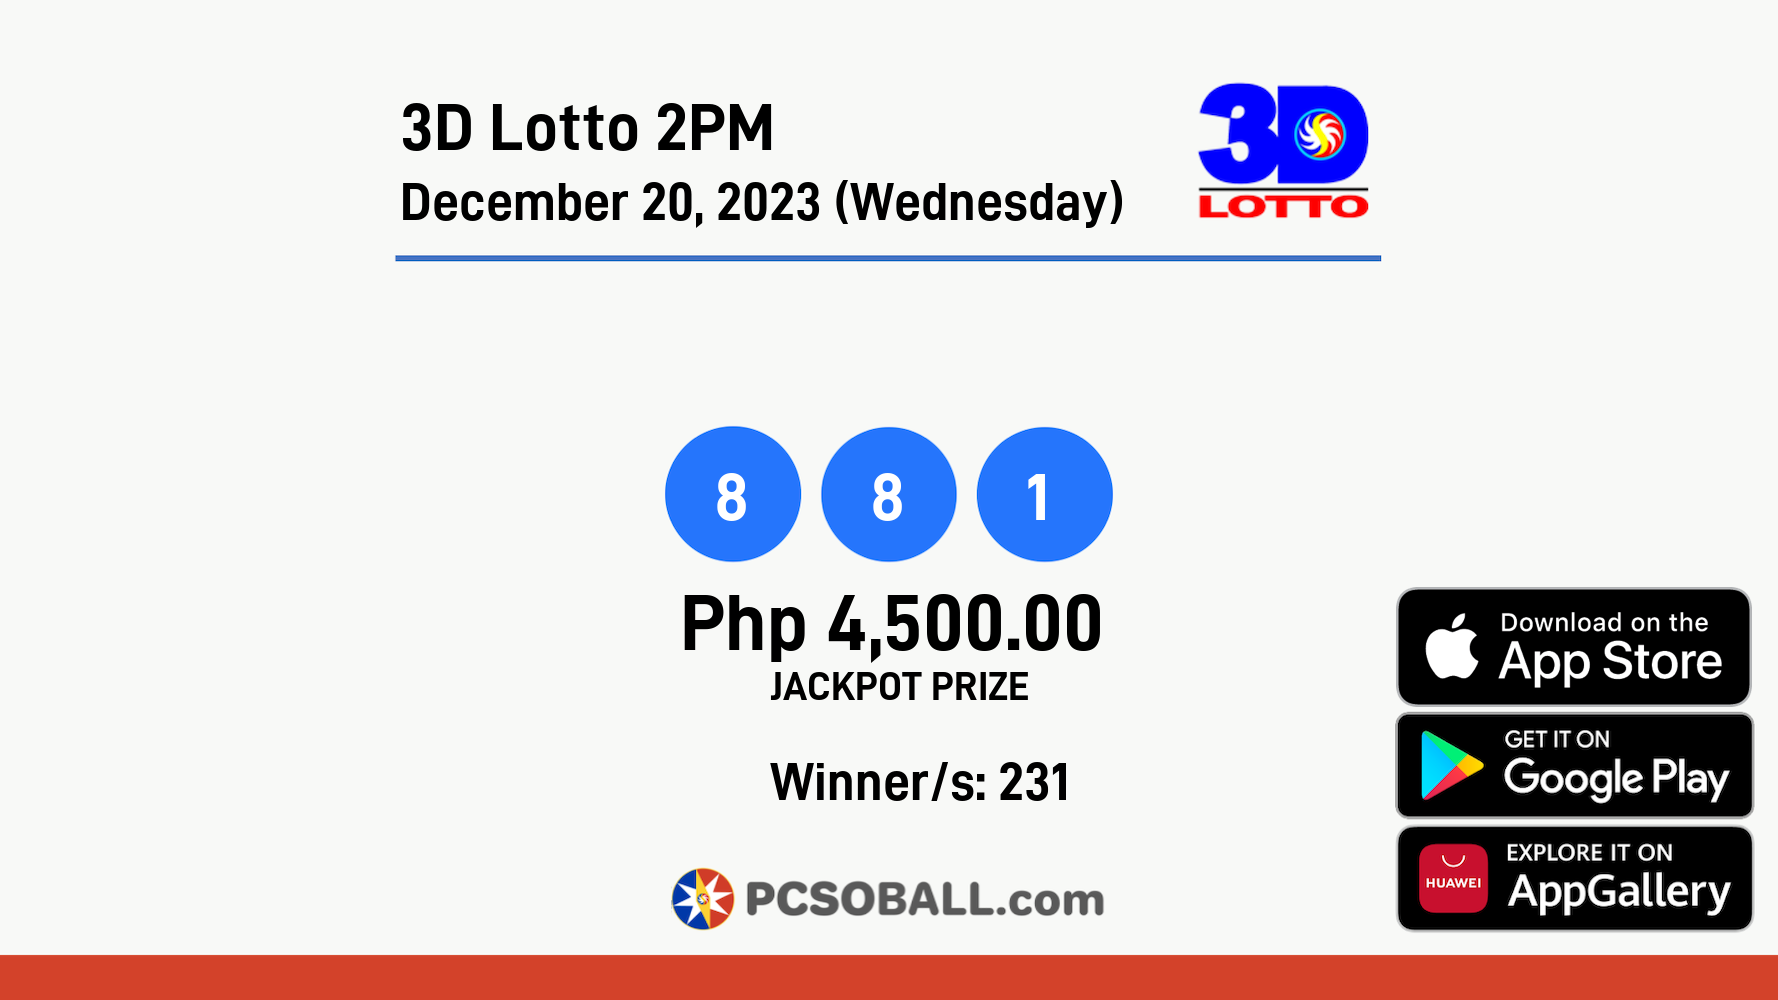 3D Lotto 2PM December 20, 2023 (Wednesday) Result